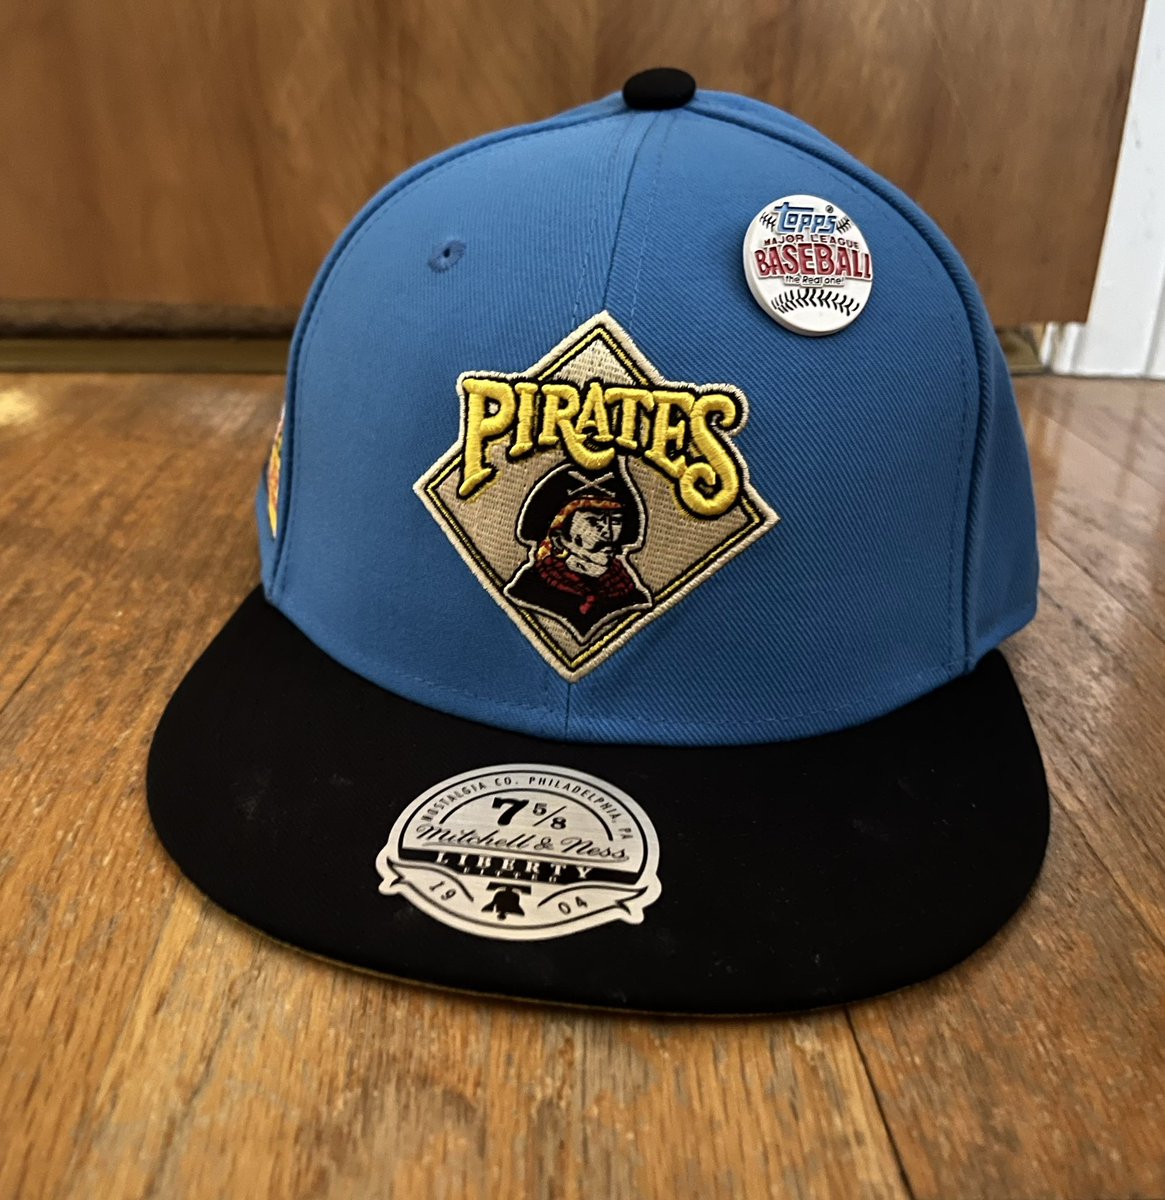 1986-92 Pittsburgh Pirates on X: This new collab #Pittsburgh #Pirates hat  between @lids and @topps is 🔥 #LetsGoBucs  / X